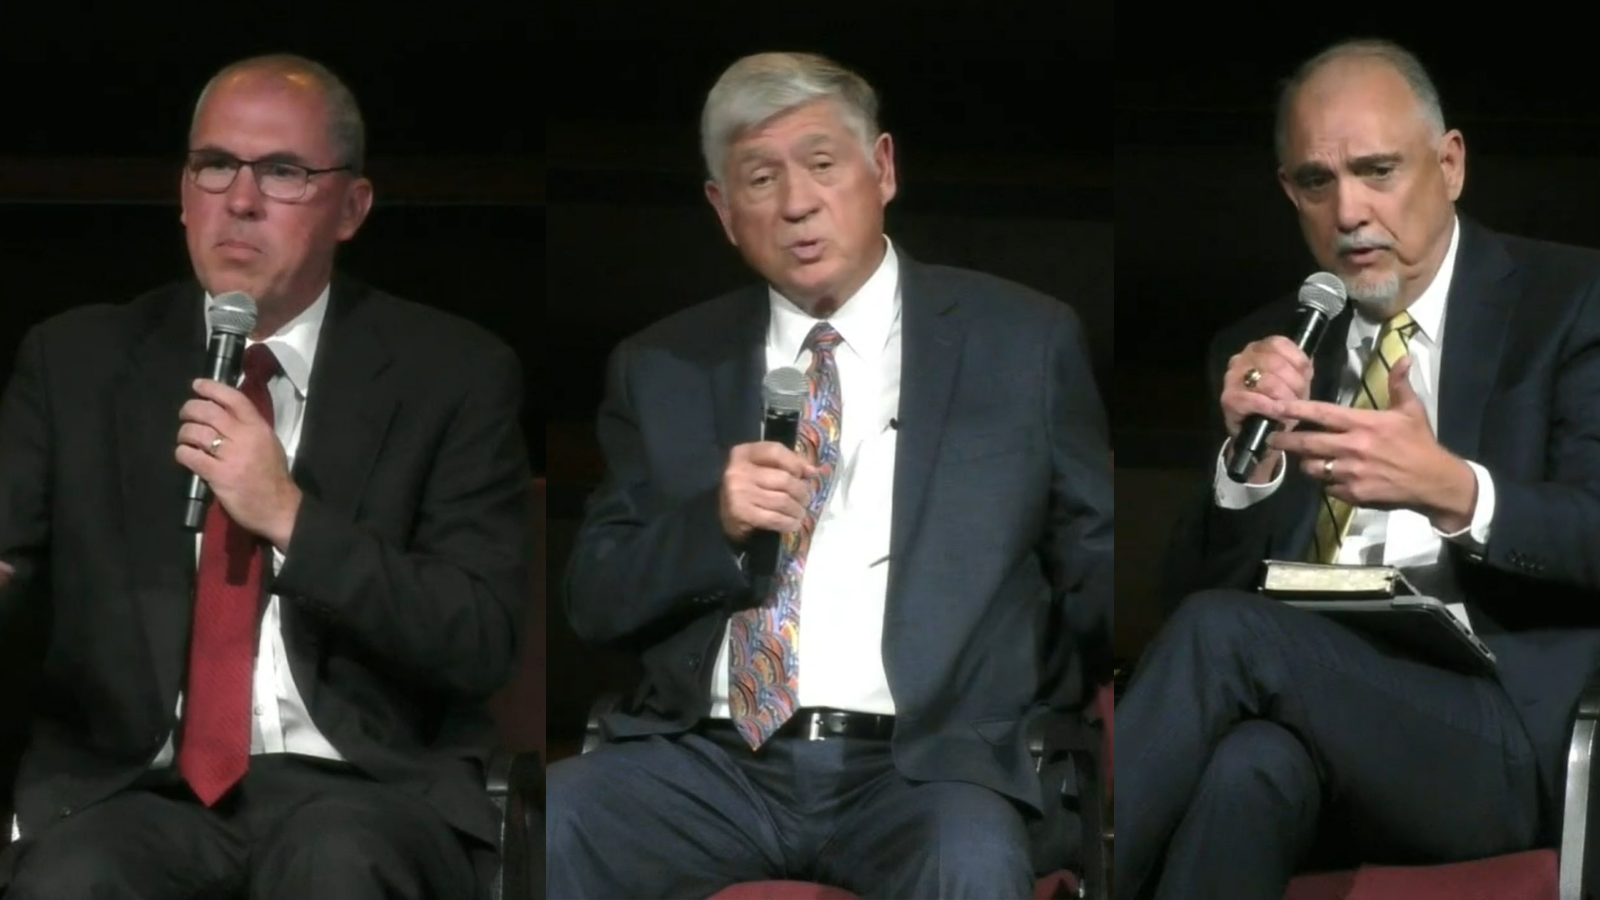 Bart Barber, Robin Hadaway, and Tom Ascol. Taken from panel discussion video. (TBP)